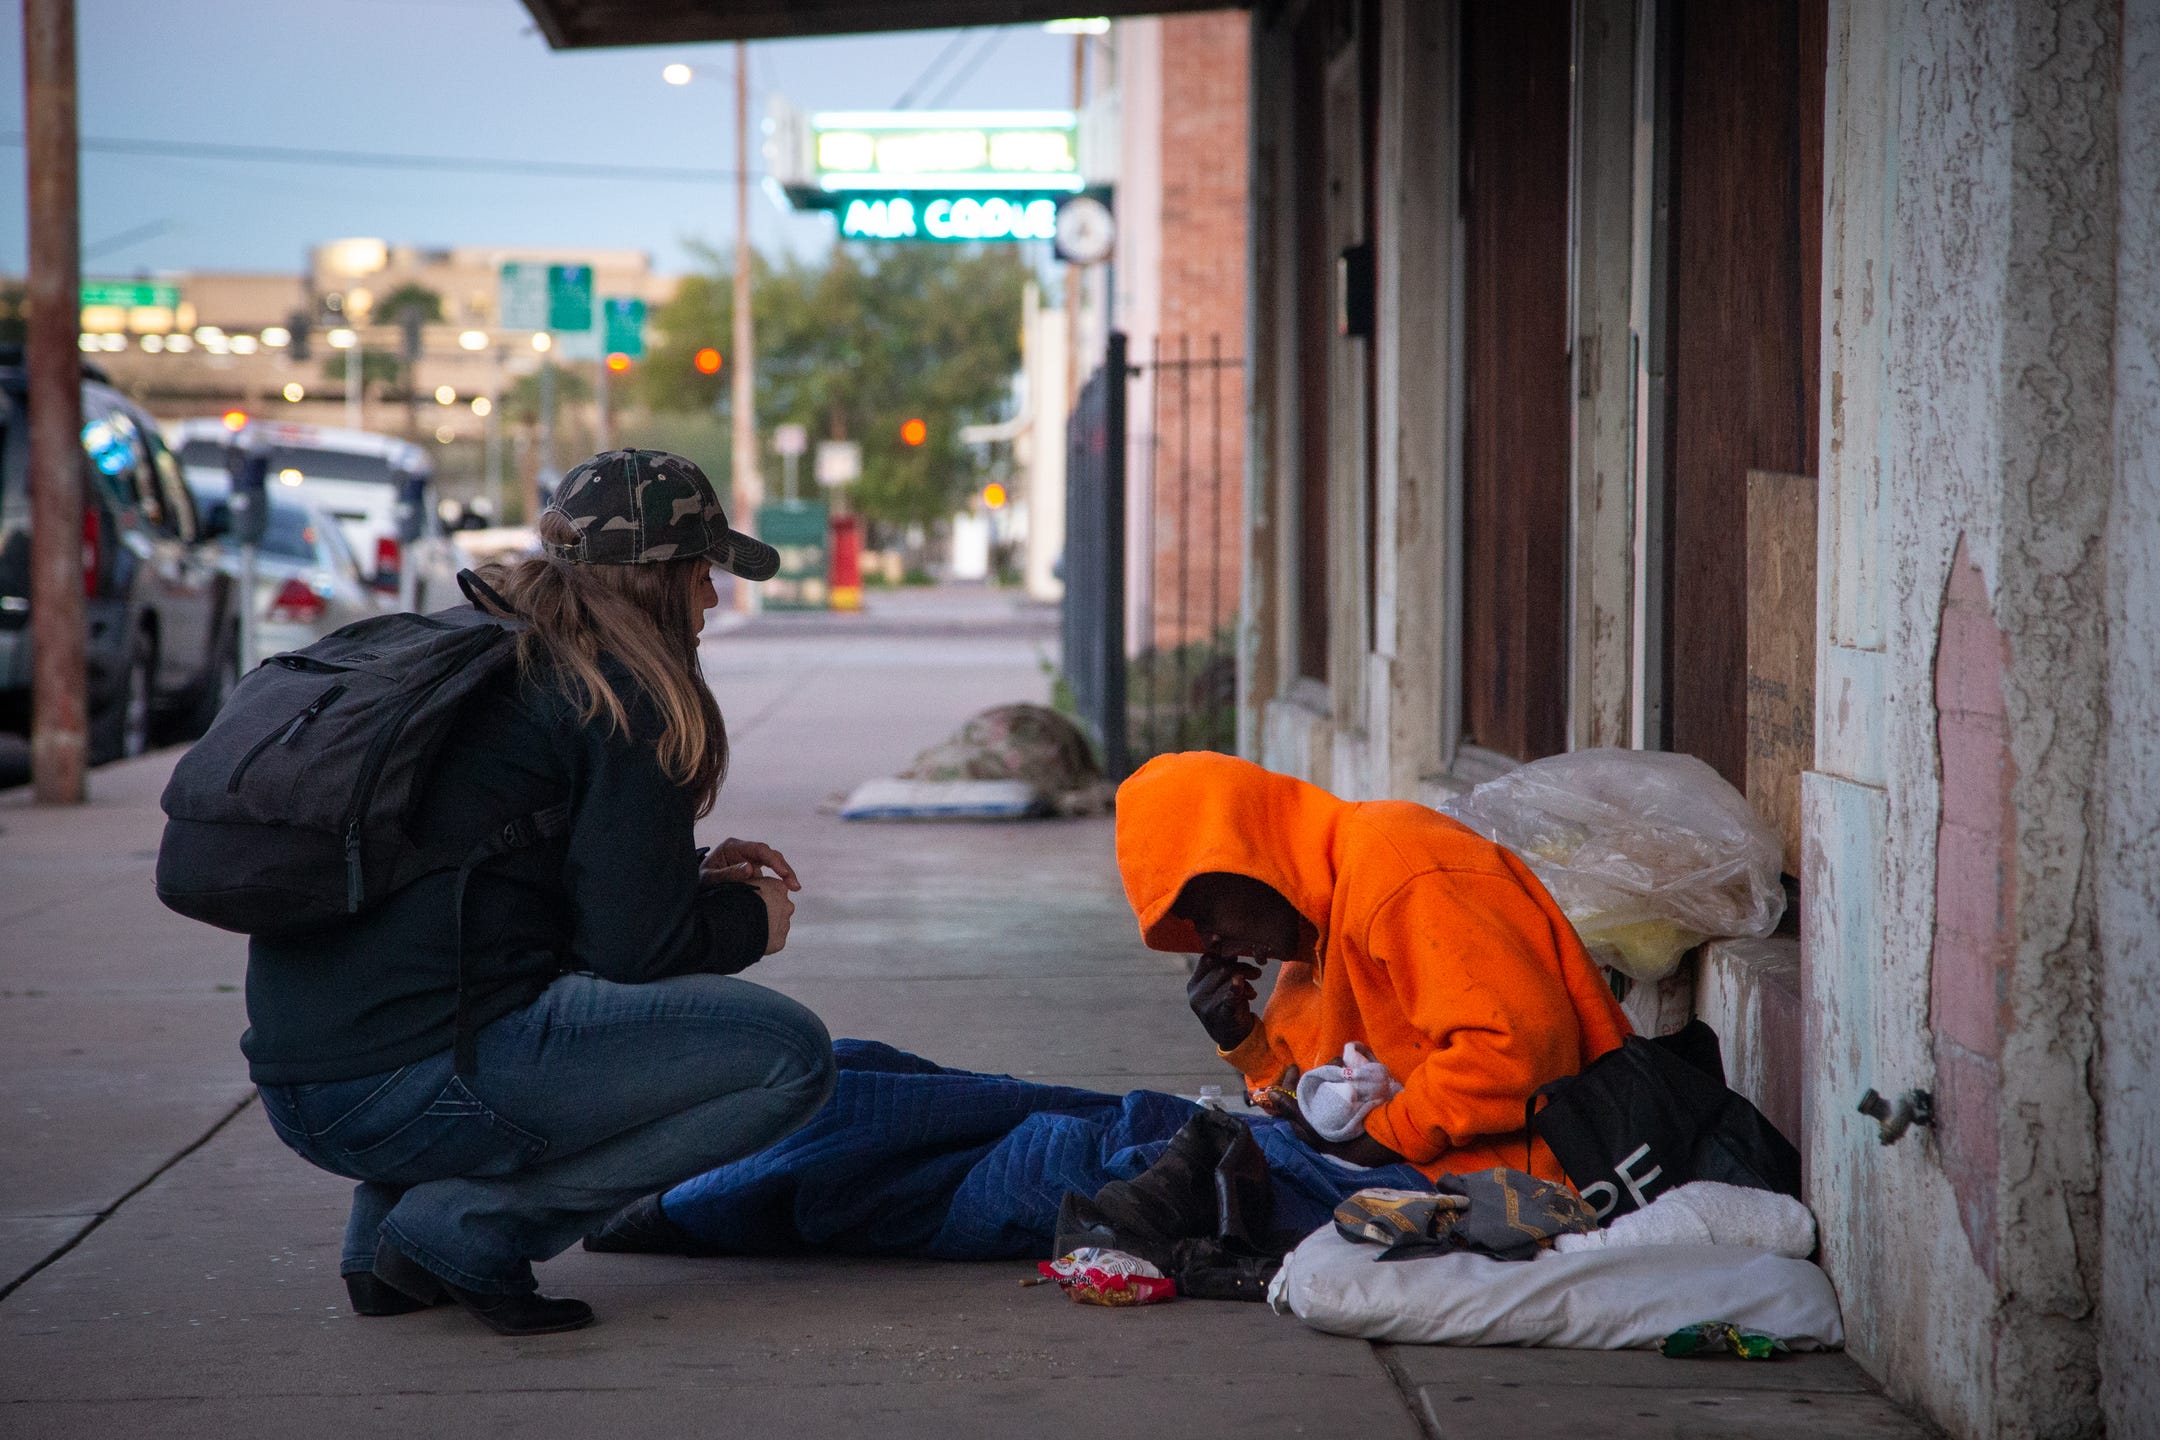 Homelessness in Phoenix area Meet 16 people and hear their stories